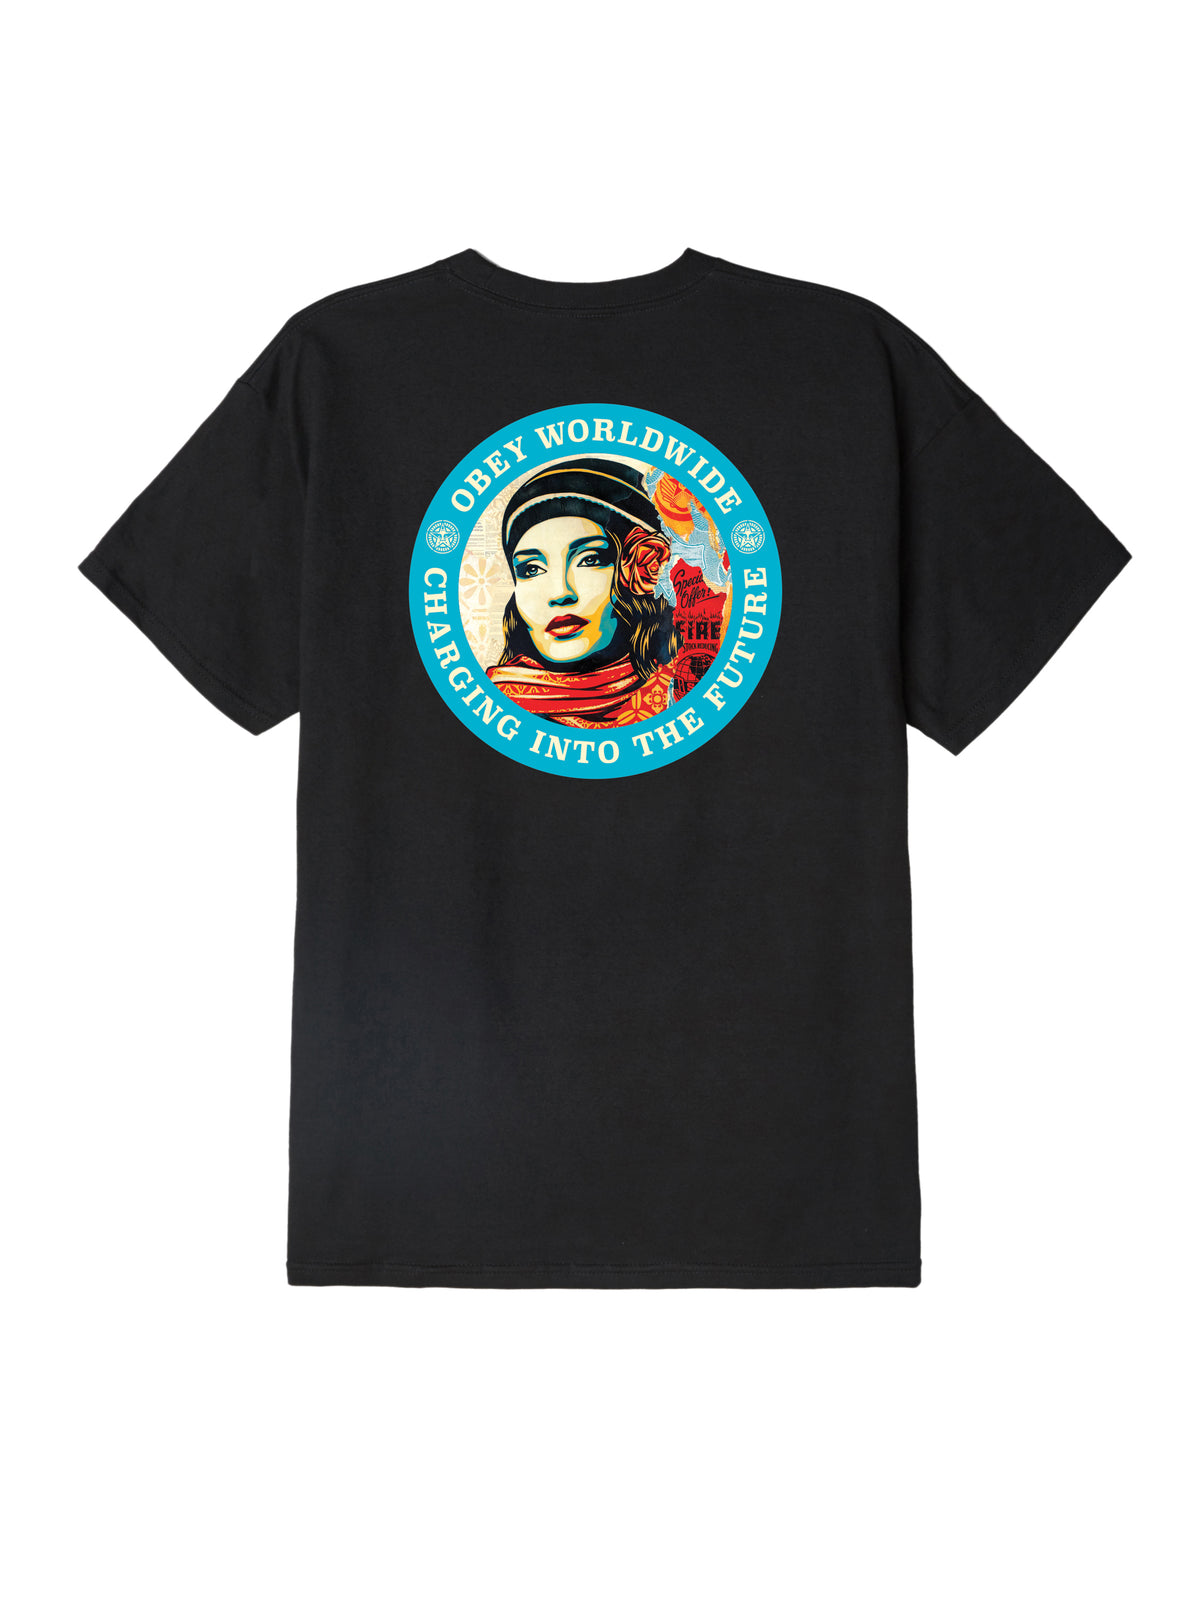 OBEY - Charging Into The Future Men's Tee, Black